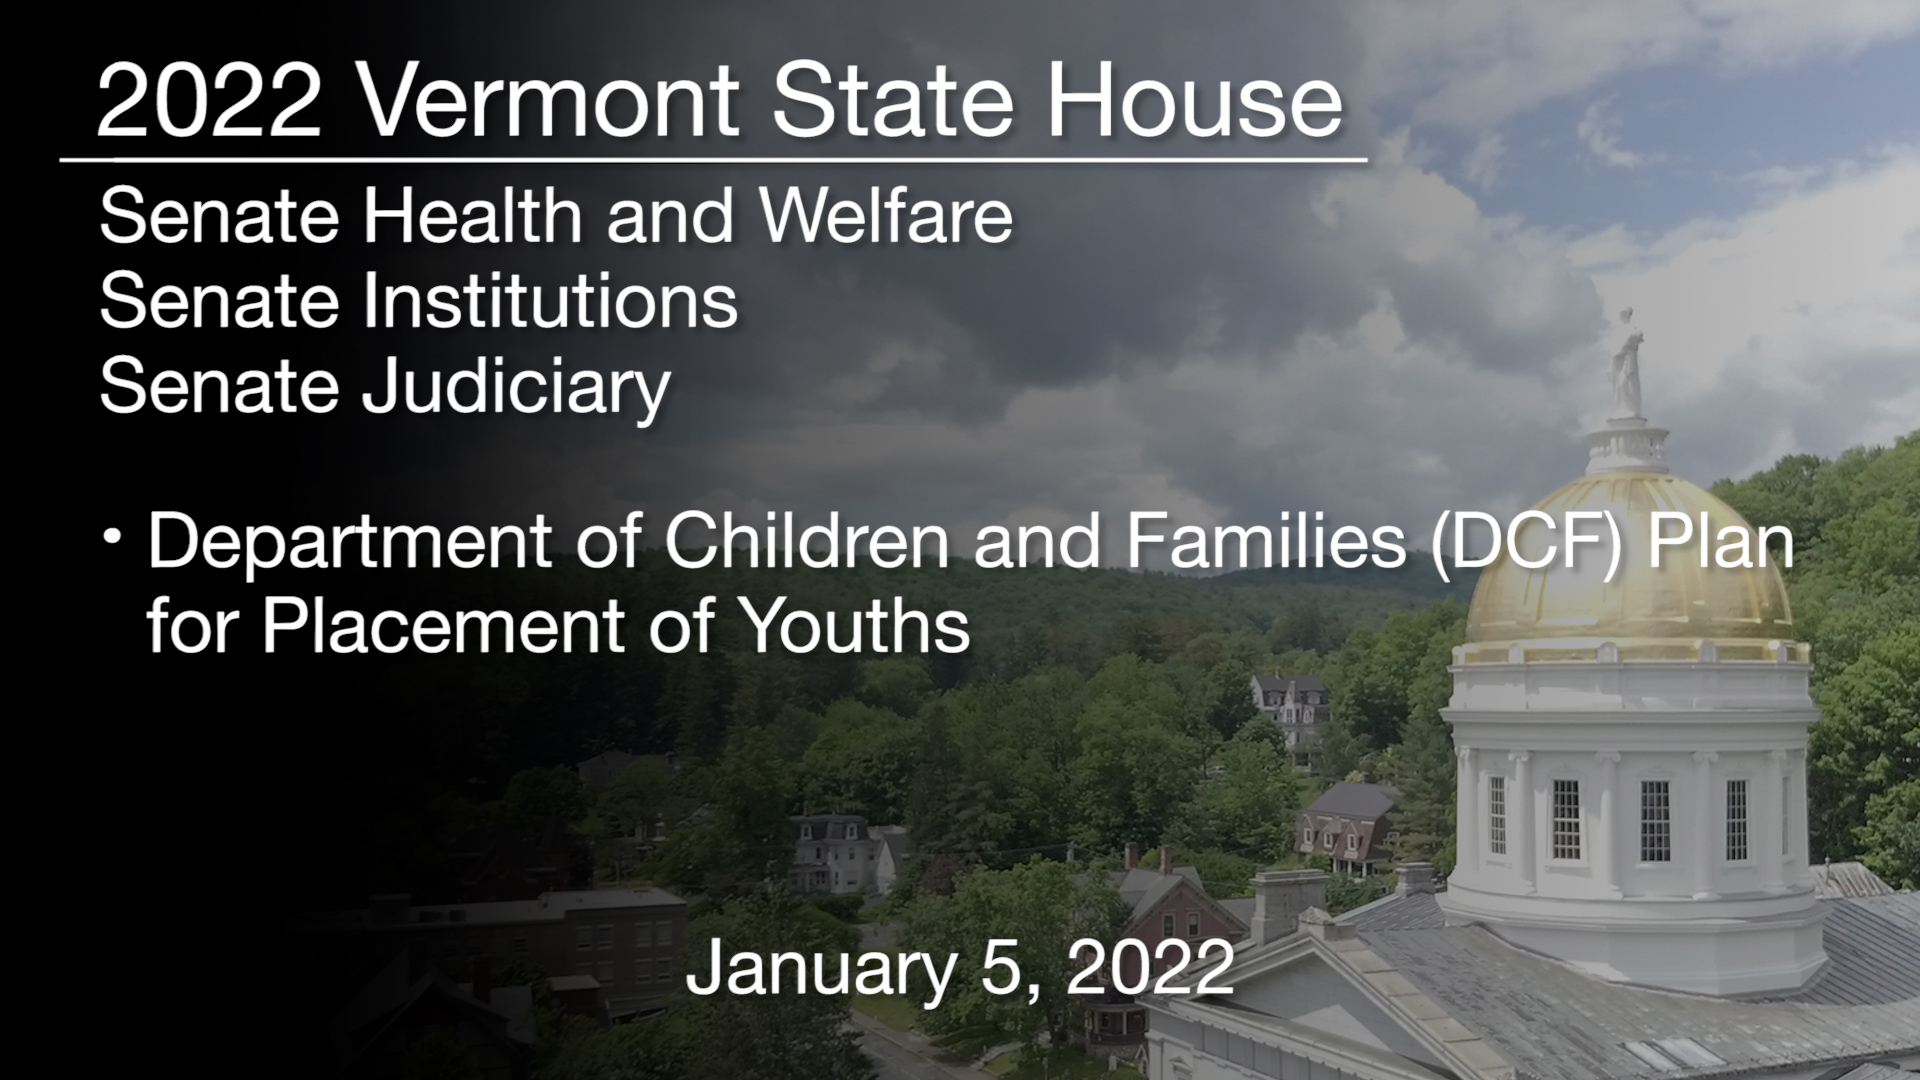 Department of Children and Families (DCF) Plan for